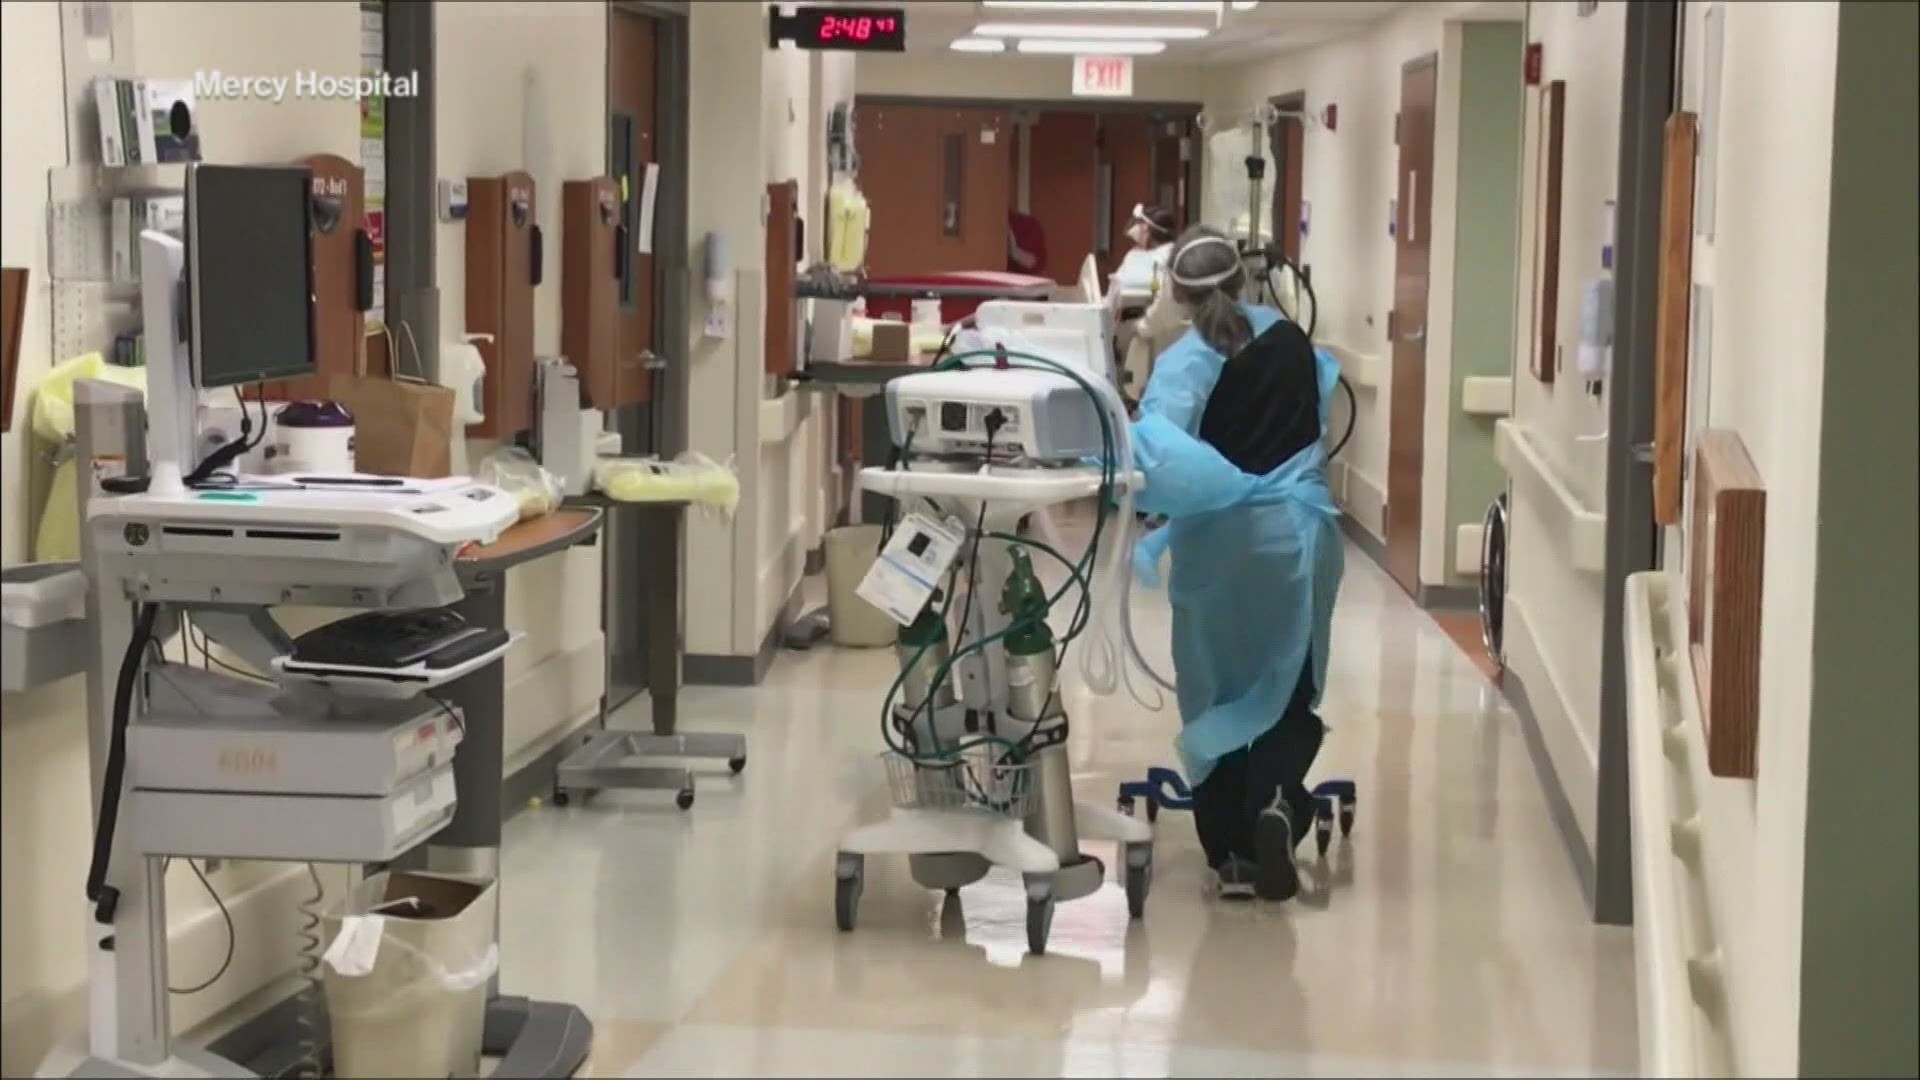 Denton County officials say more than 93% of the county's ICU beds are now in use. One official said they are seeing a "concerning" surge among the unvaccinated.